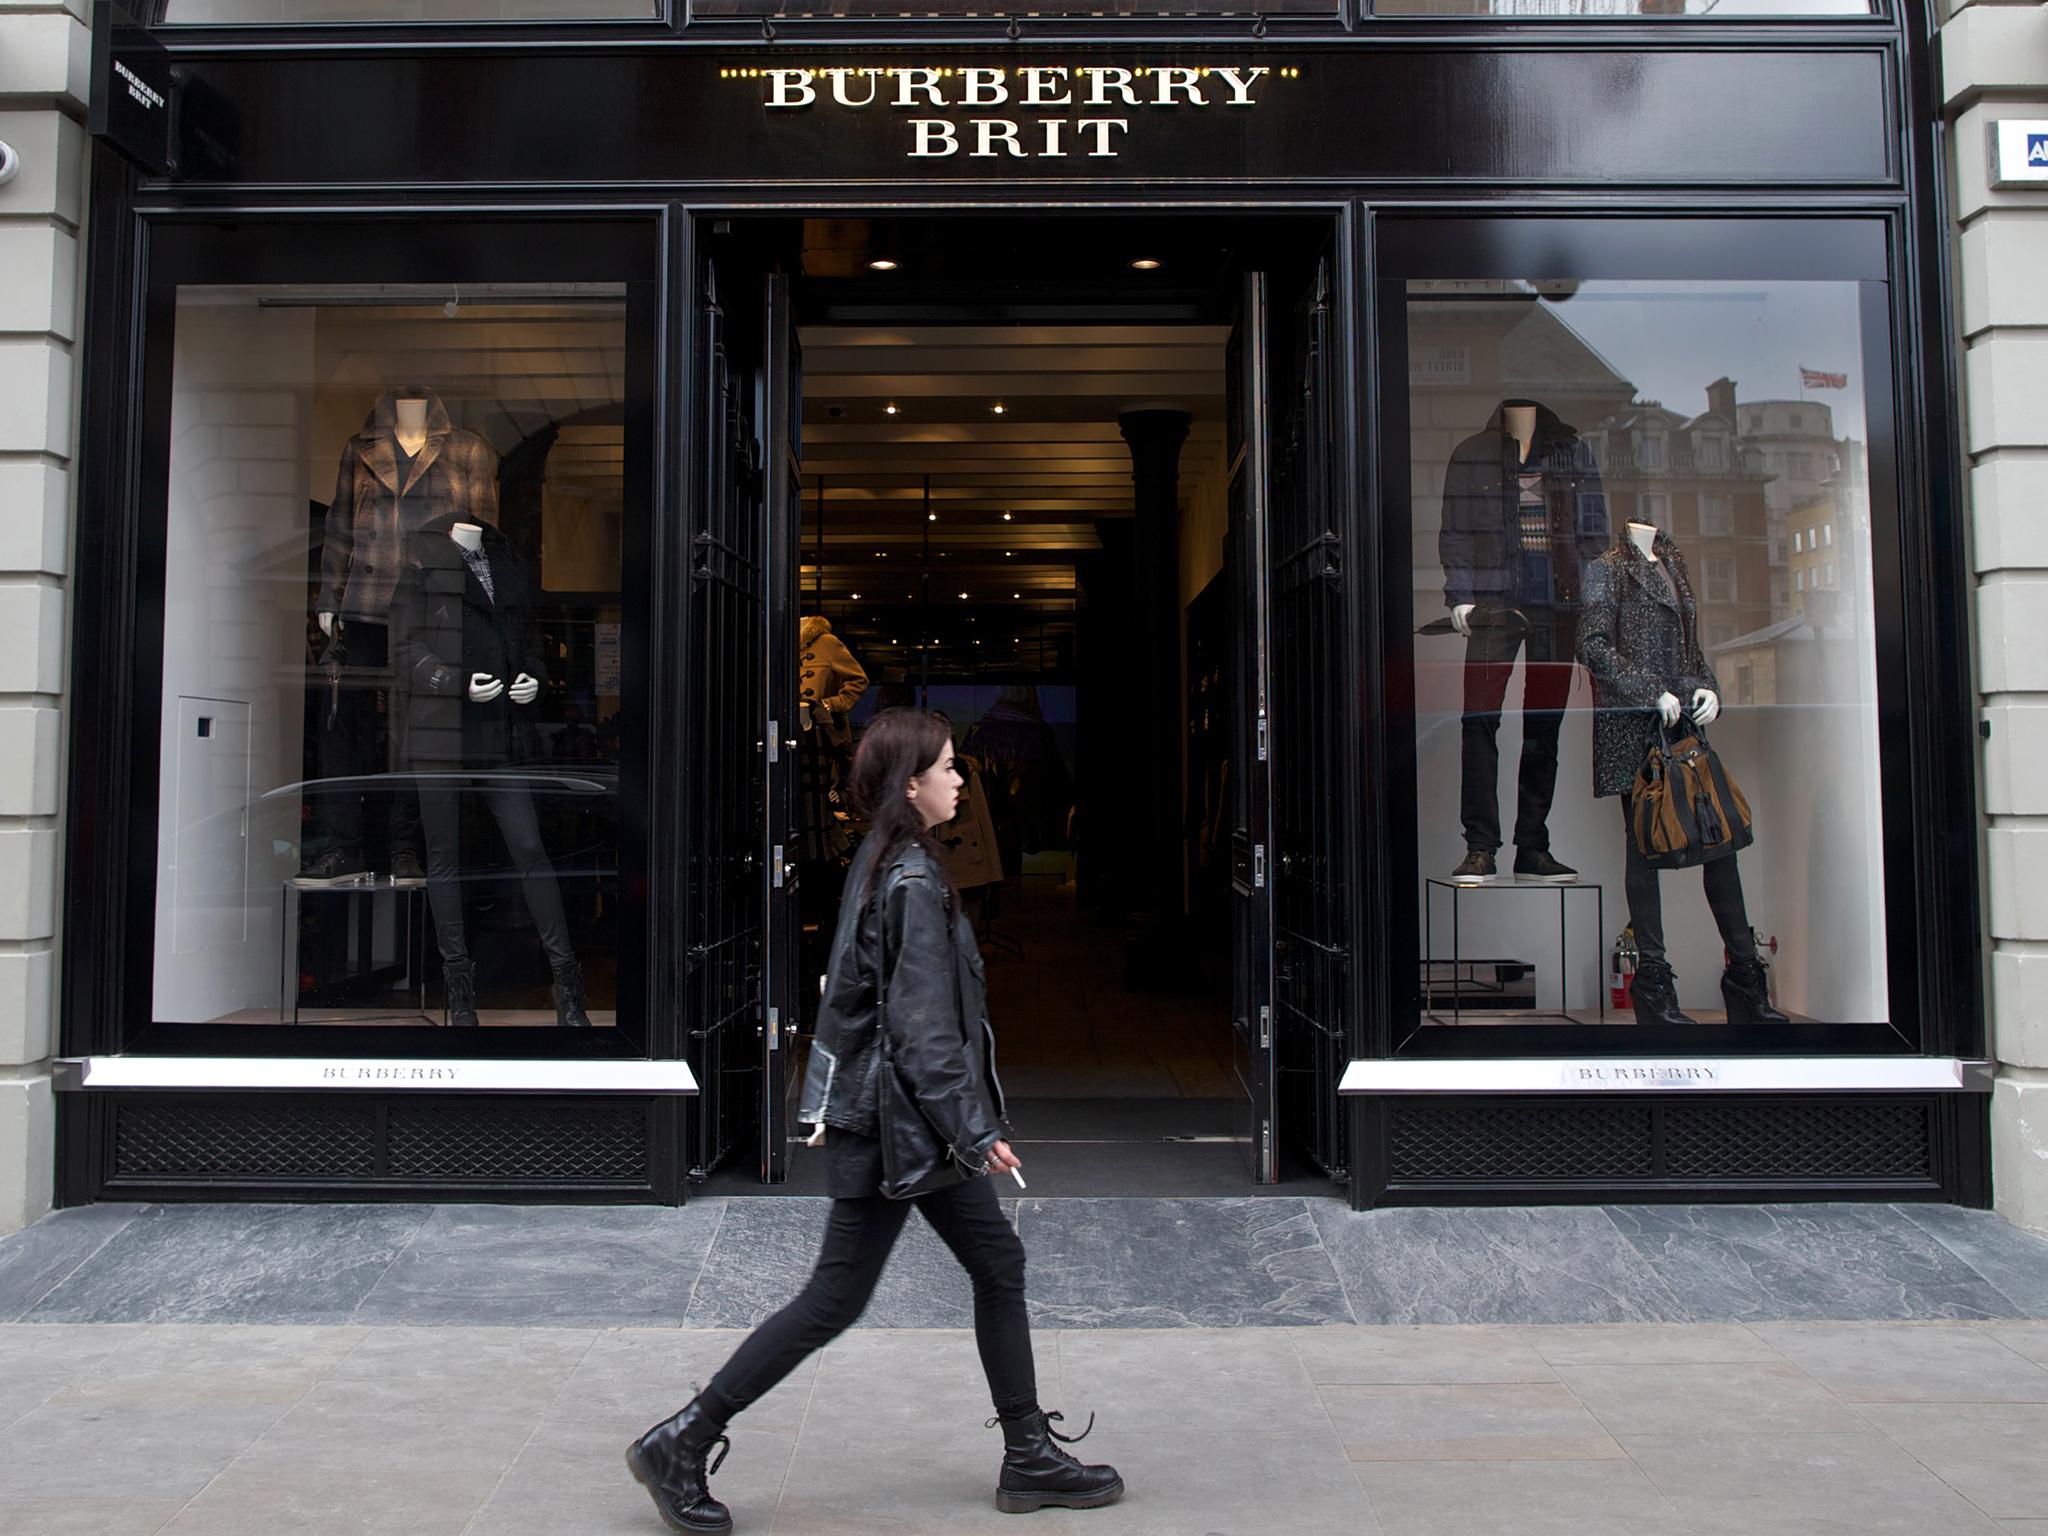 30 per cent of Burberry’s sales go to the Asia-Pacific region